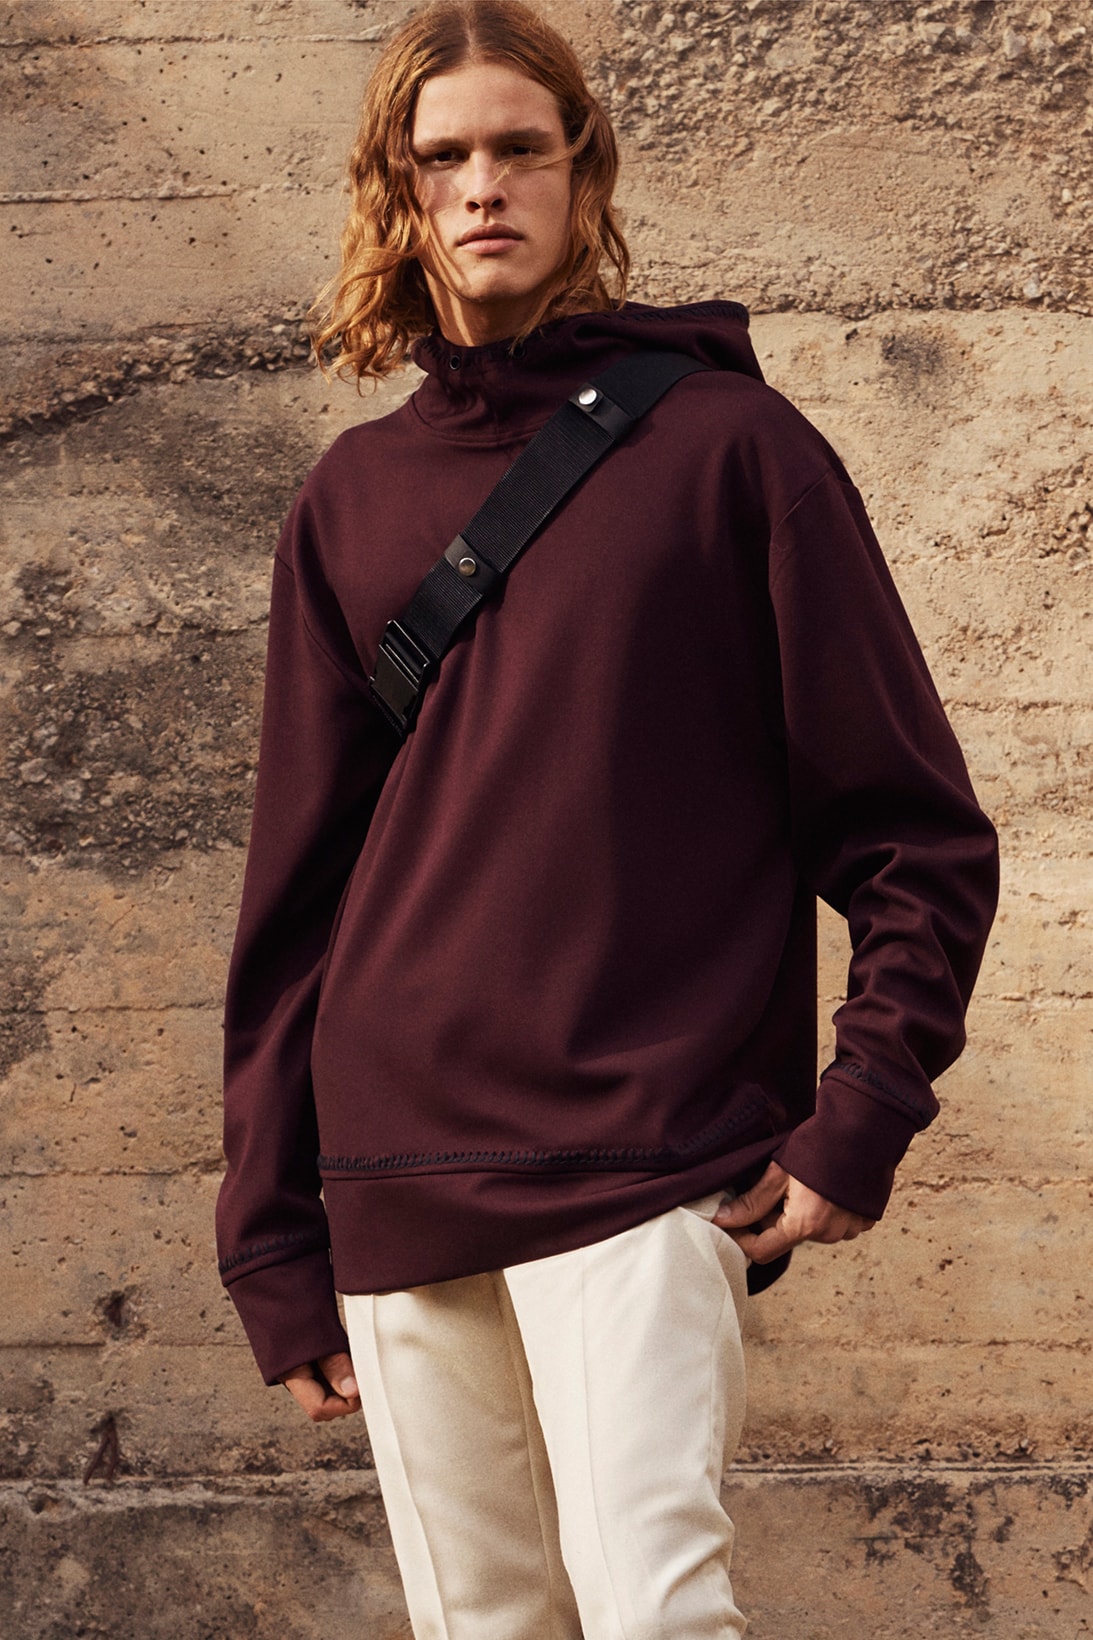 H&M Studio Fall/Winter 2017 Collection Lookbook Outdoors Mountaineering